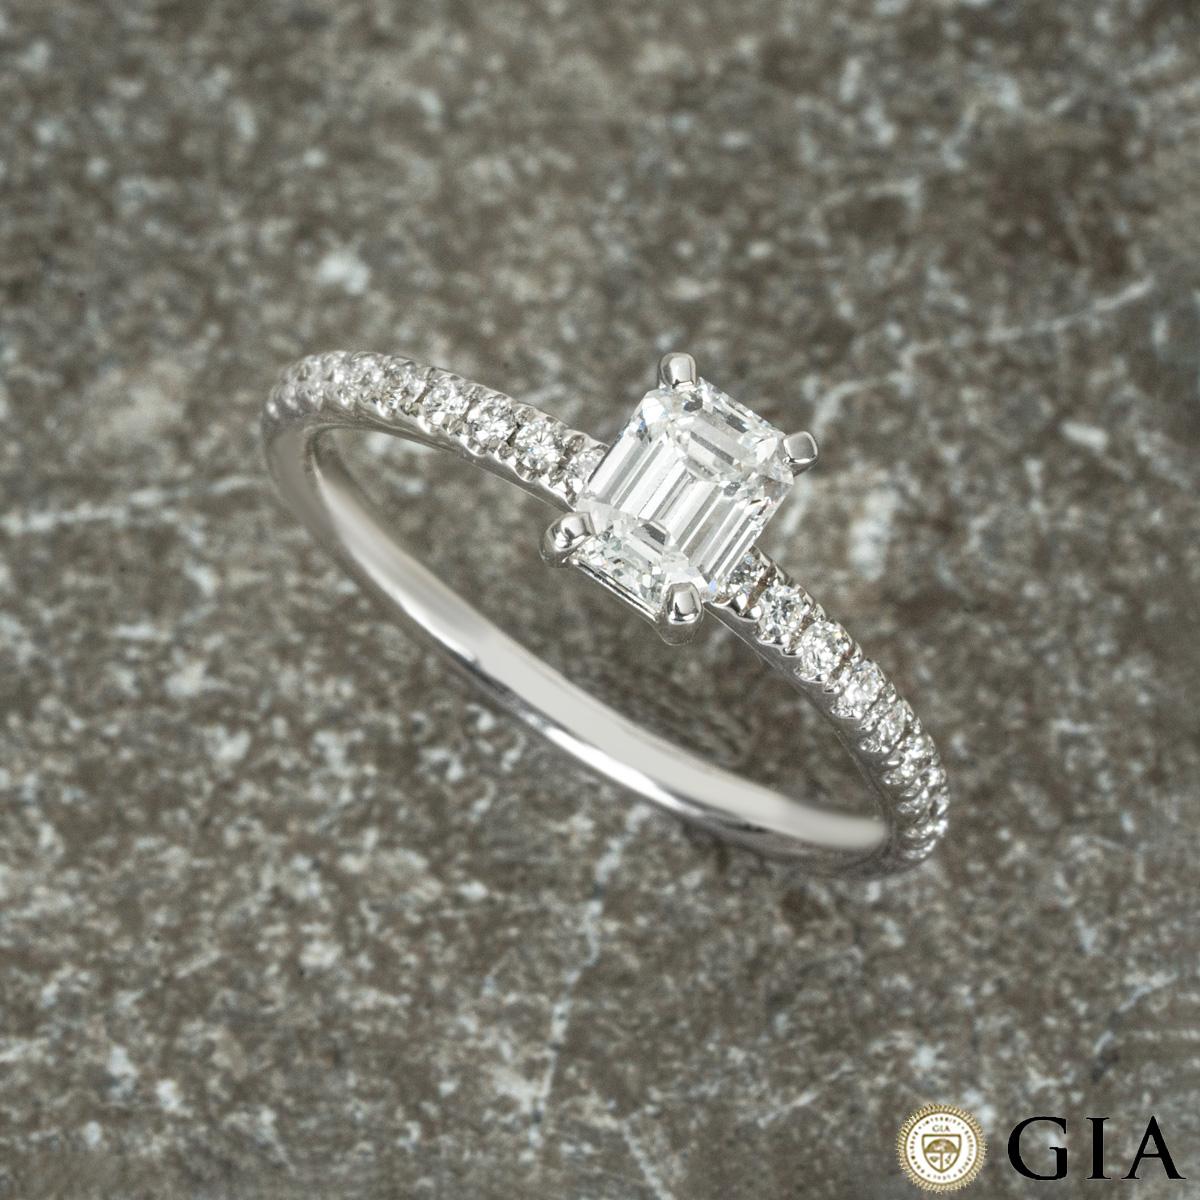 Gia Certified White Gold Emerald Cut Diamond Ring 0.59 Carat D/VS1 For Sale 4